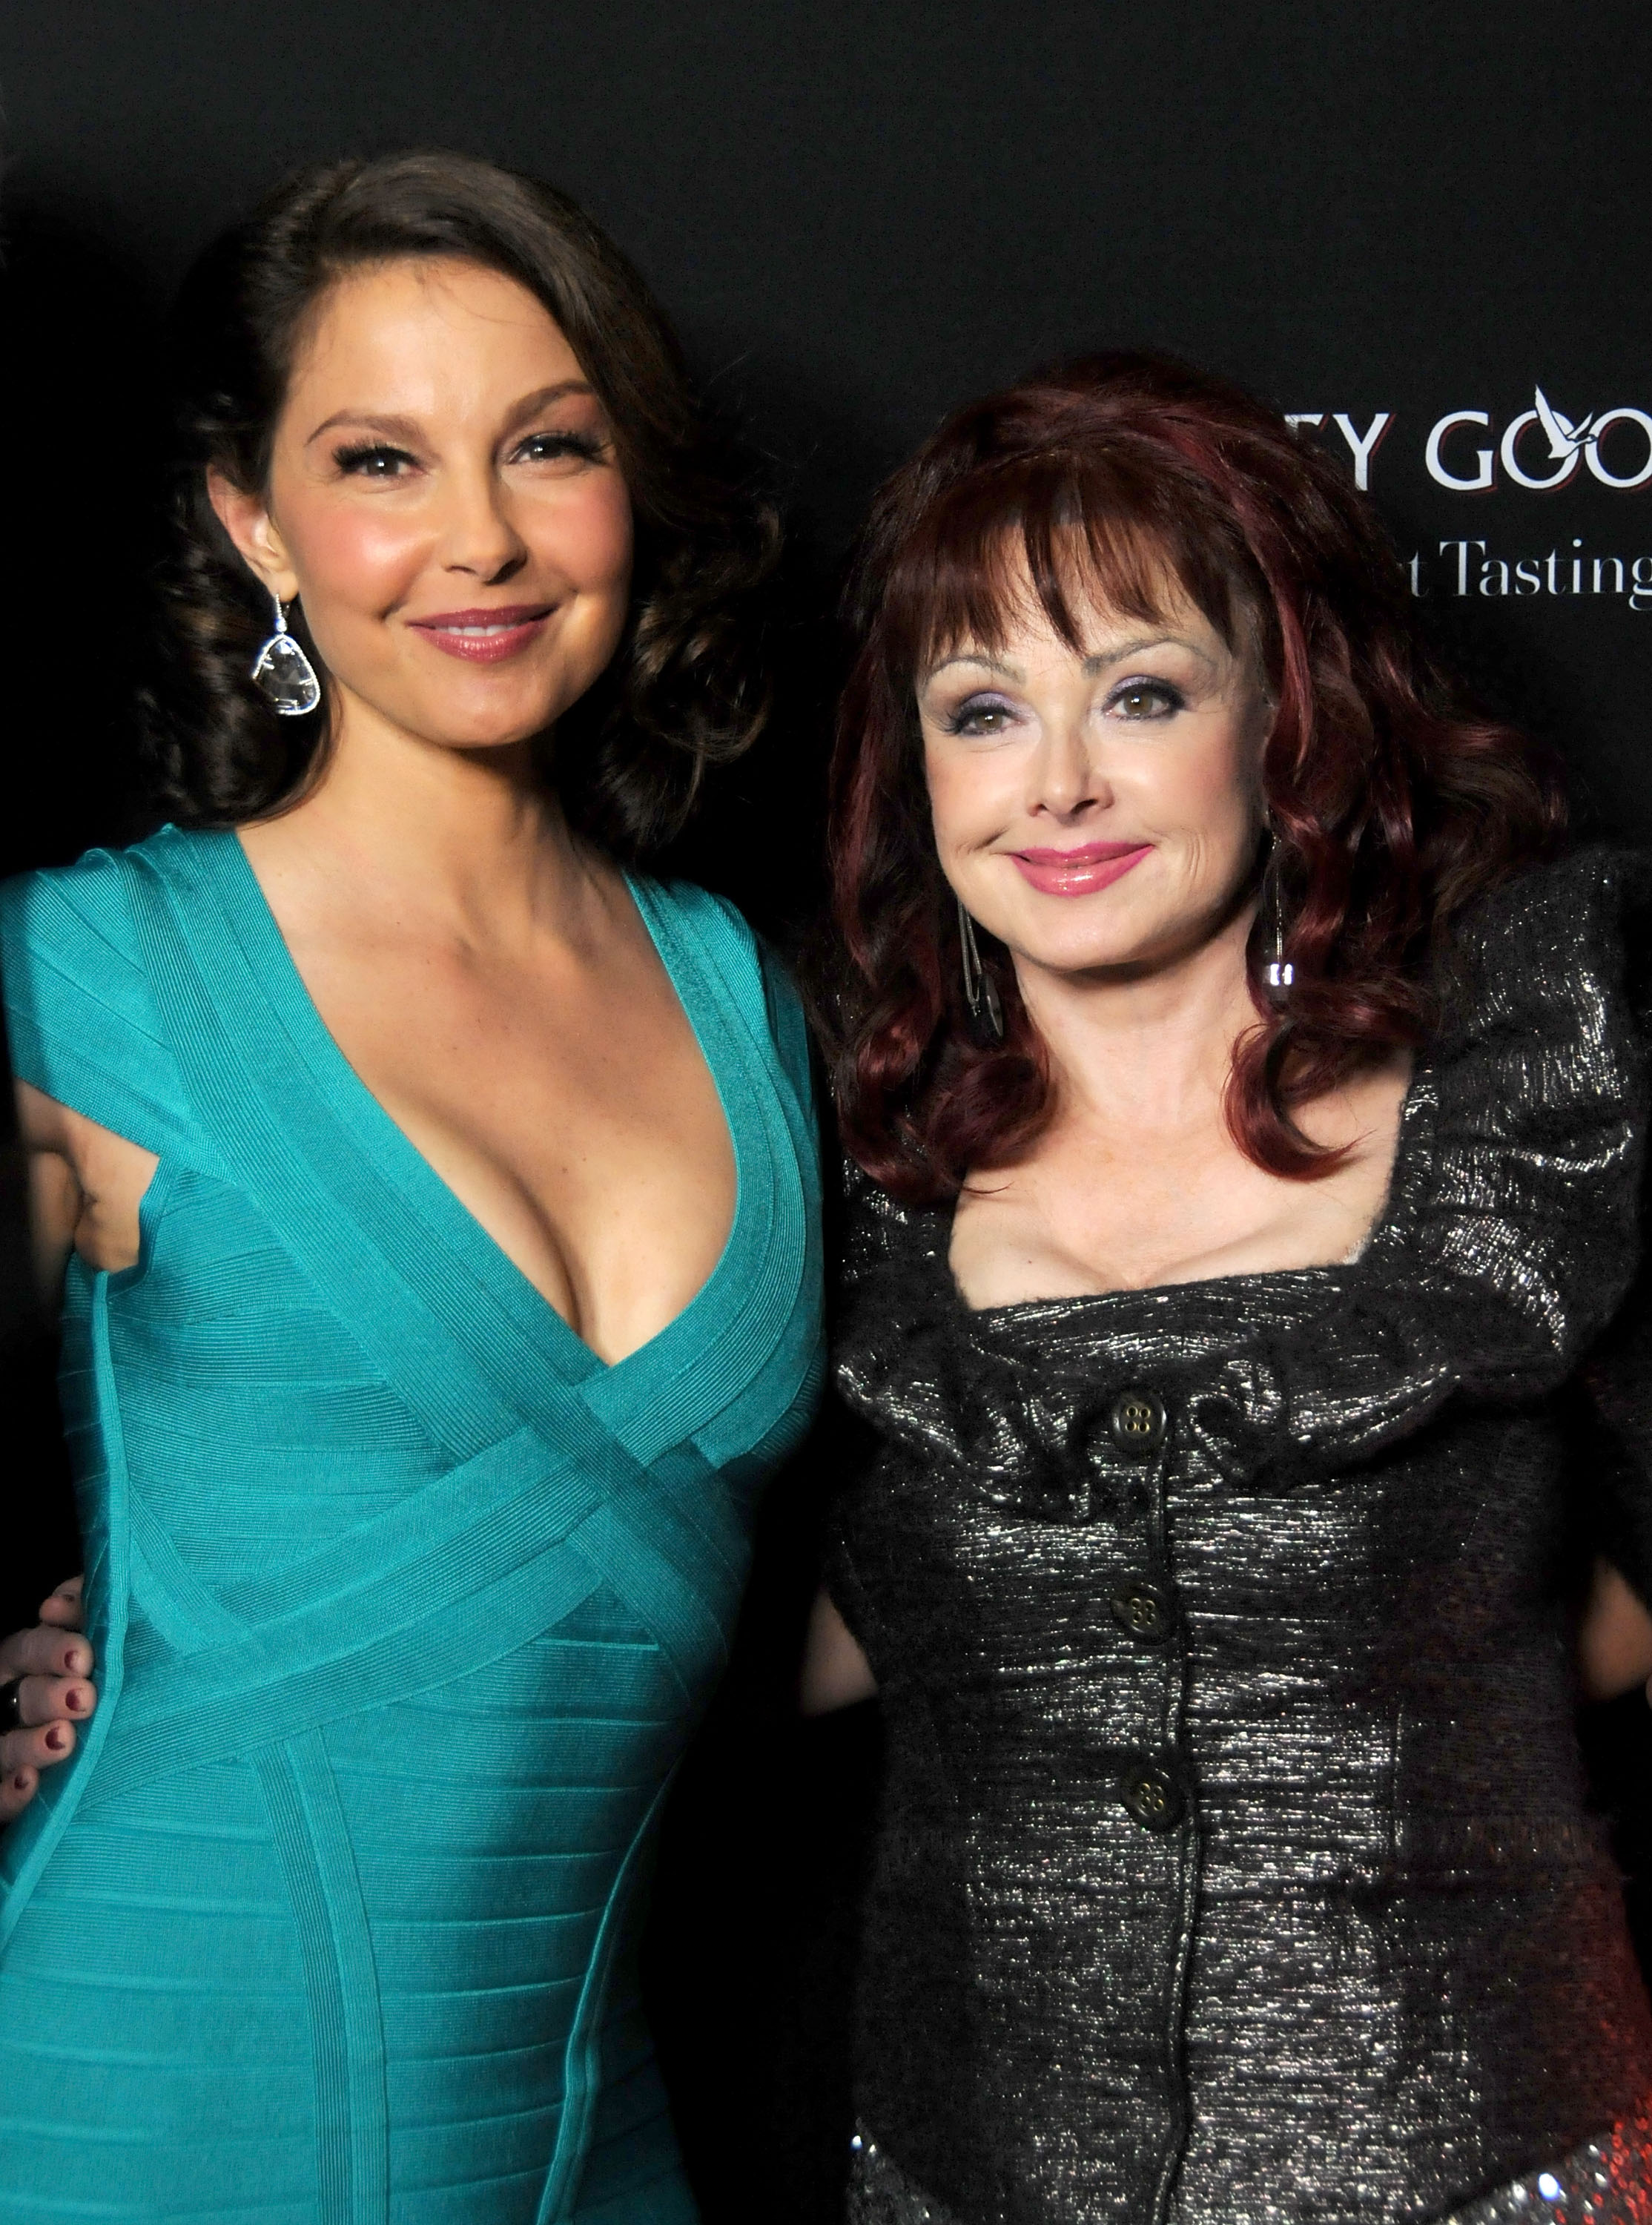 Ashley and Naomi Judd at the premiere of "Olympus Has Fallen" in Los Angeles, California on March 18, 2013 | Source: Getty Images